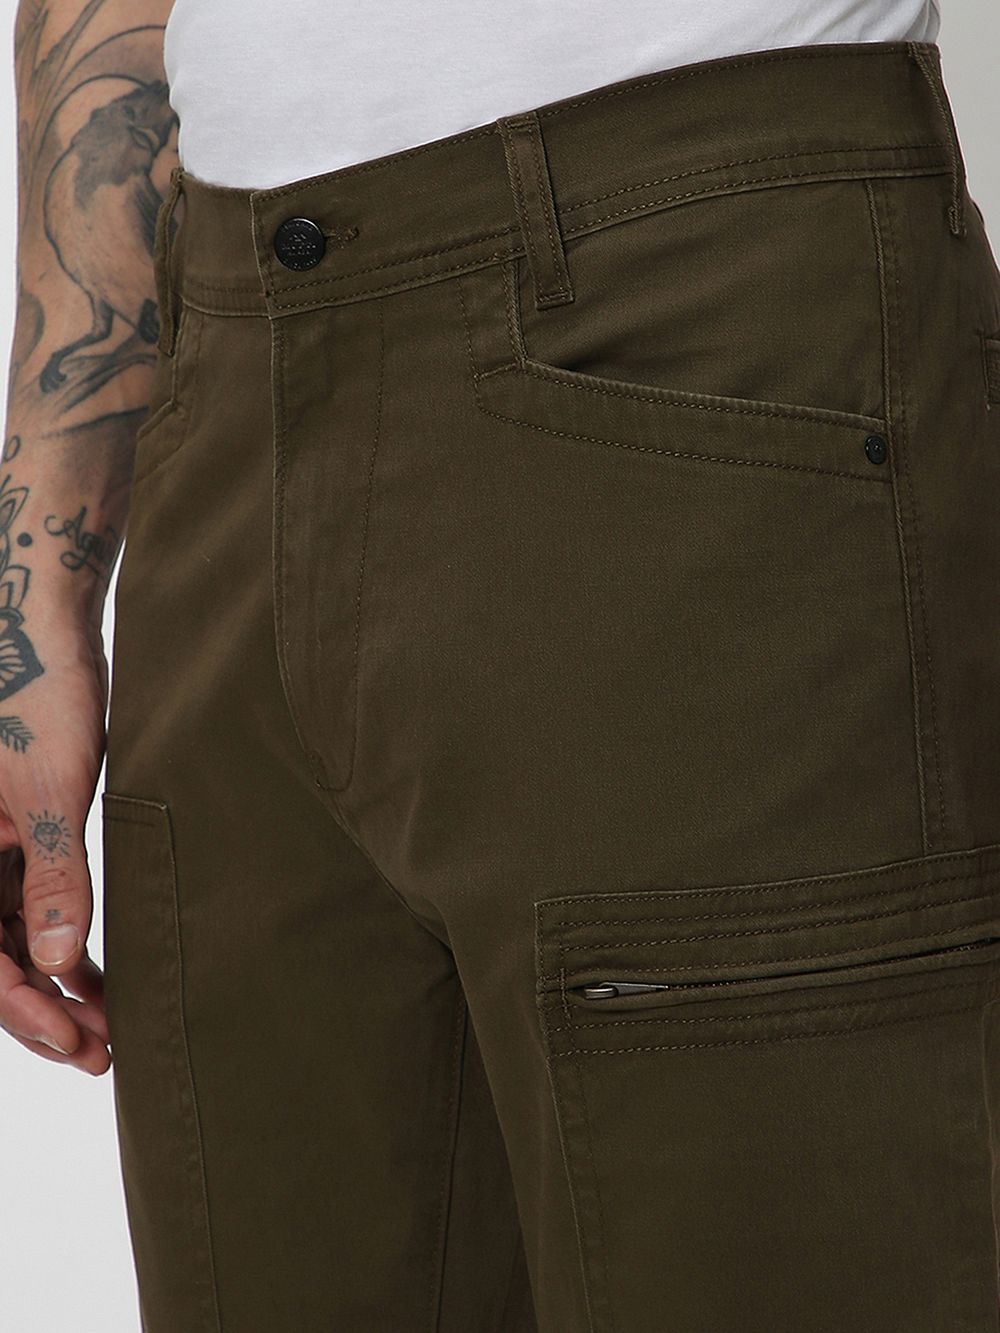 Olive Sport Fit Cargos